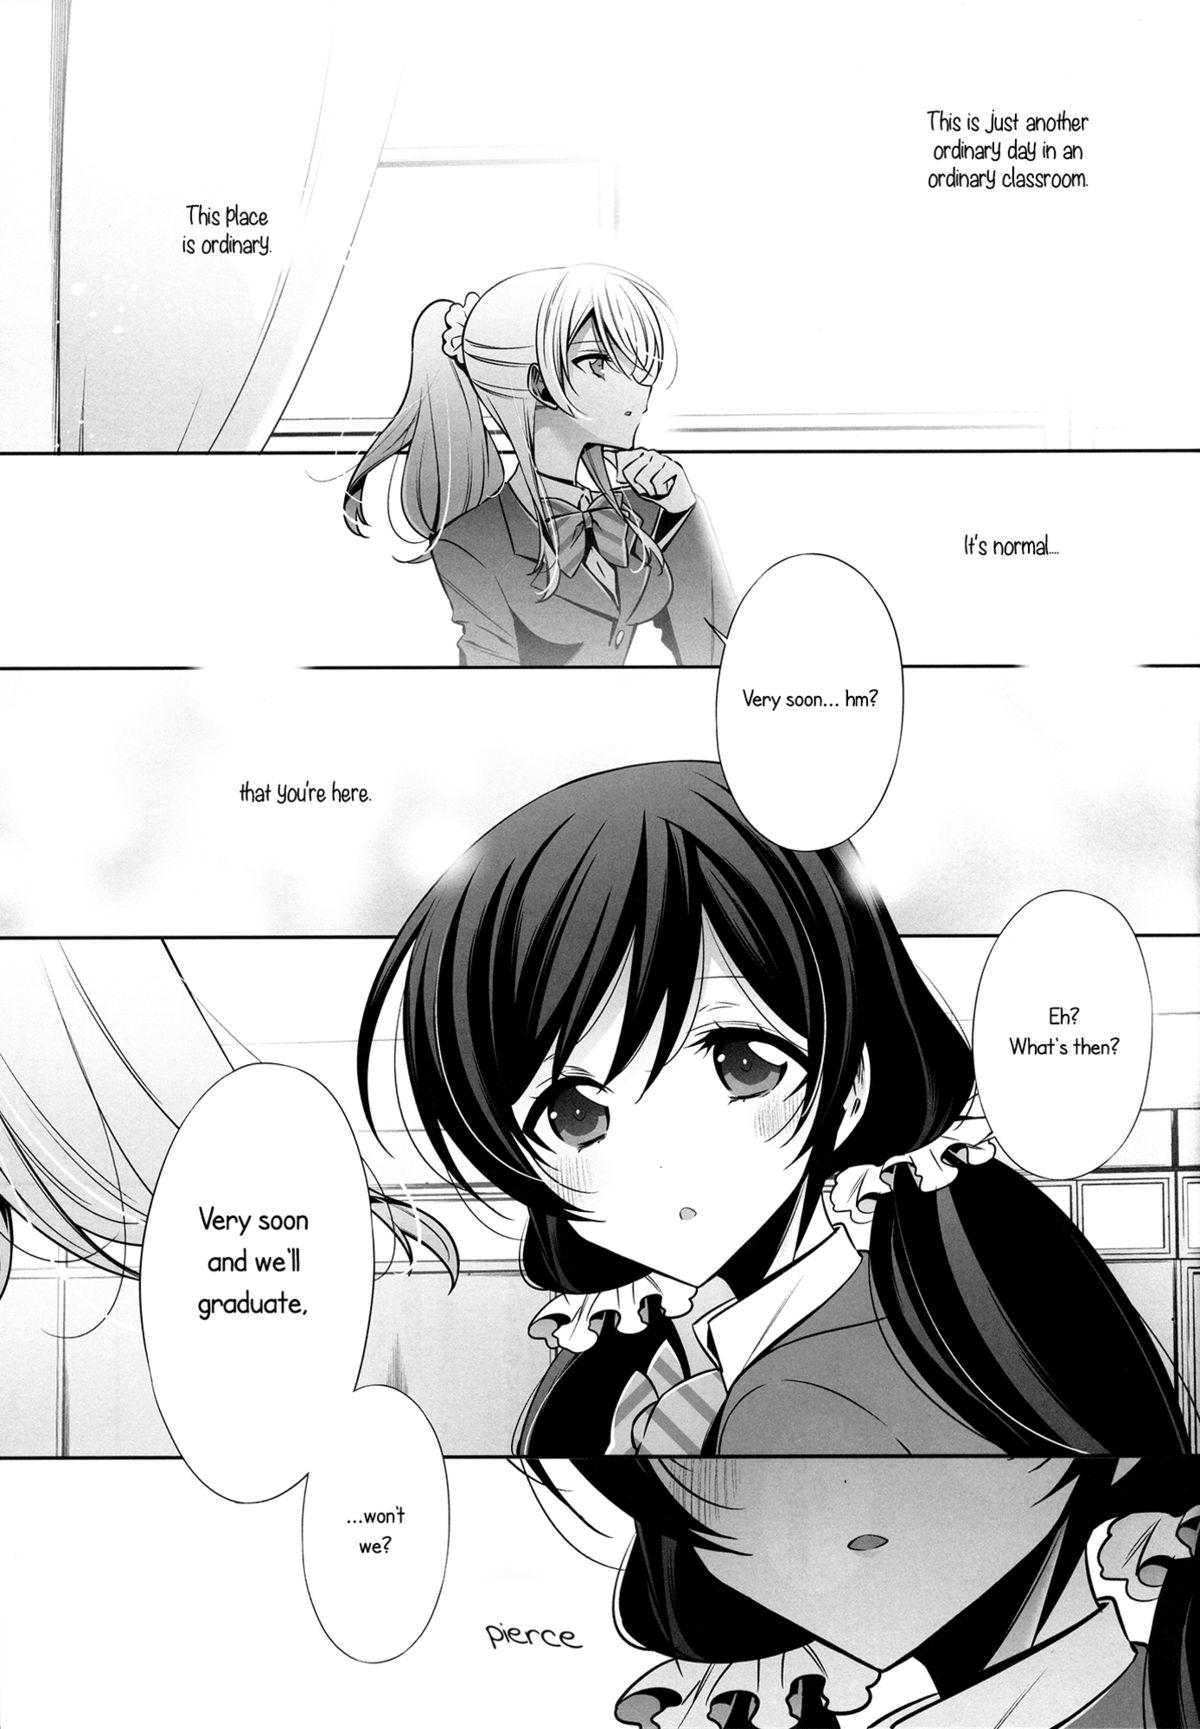 Babe Haru mo Natsu mo Aki mo Fuyu mo | In Spring, In Summer, In Autumn, In Winter. Always With You! - Love live Penis Sucking - Page 3